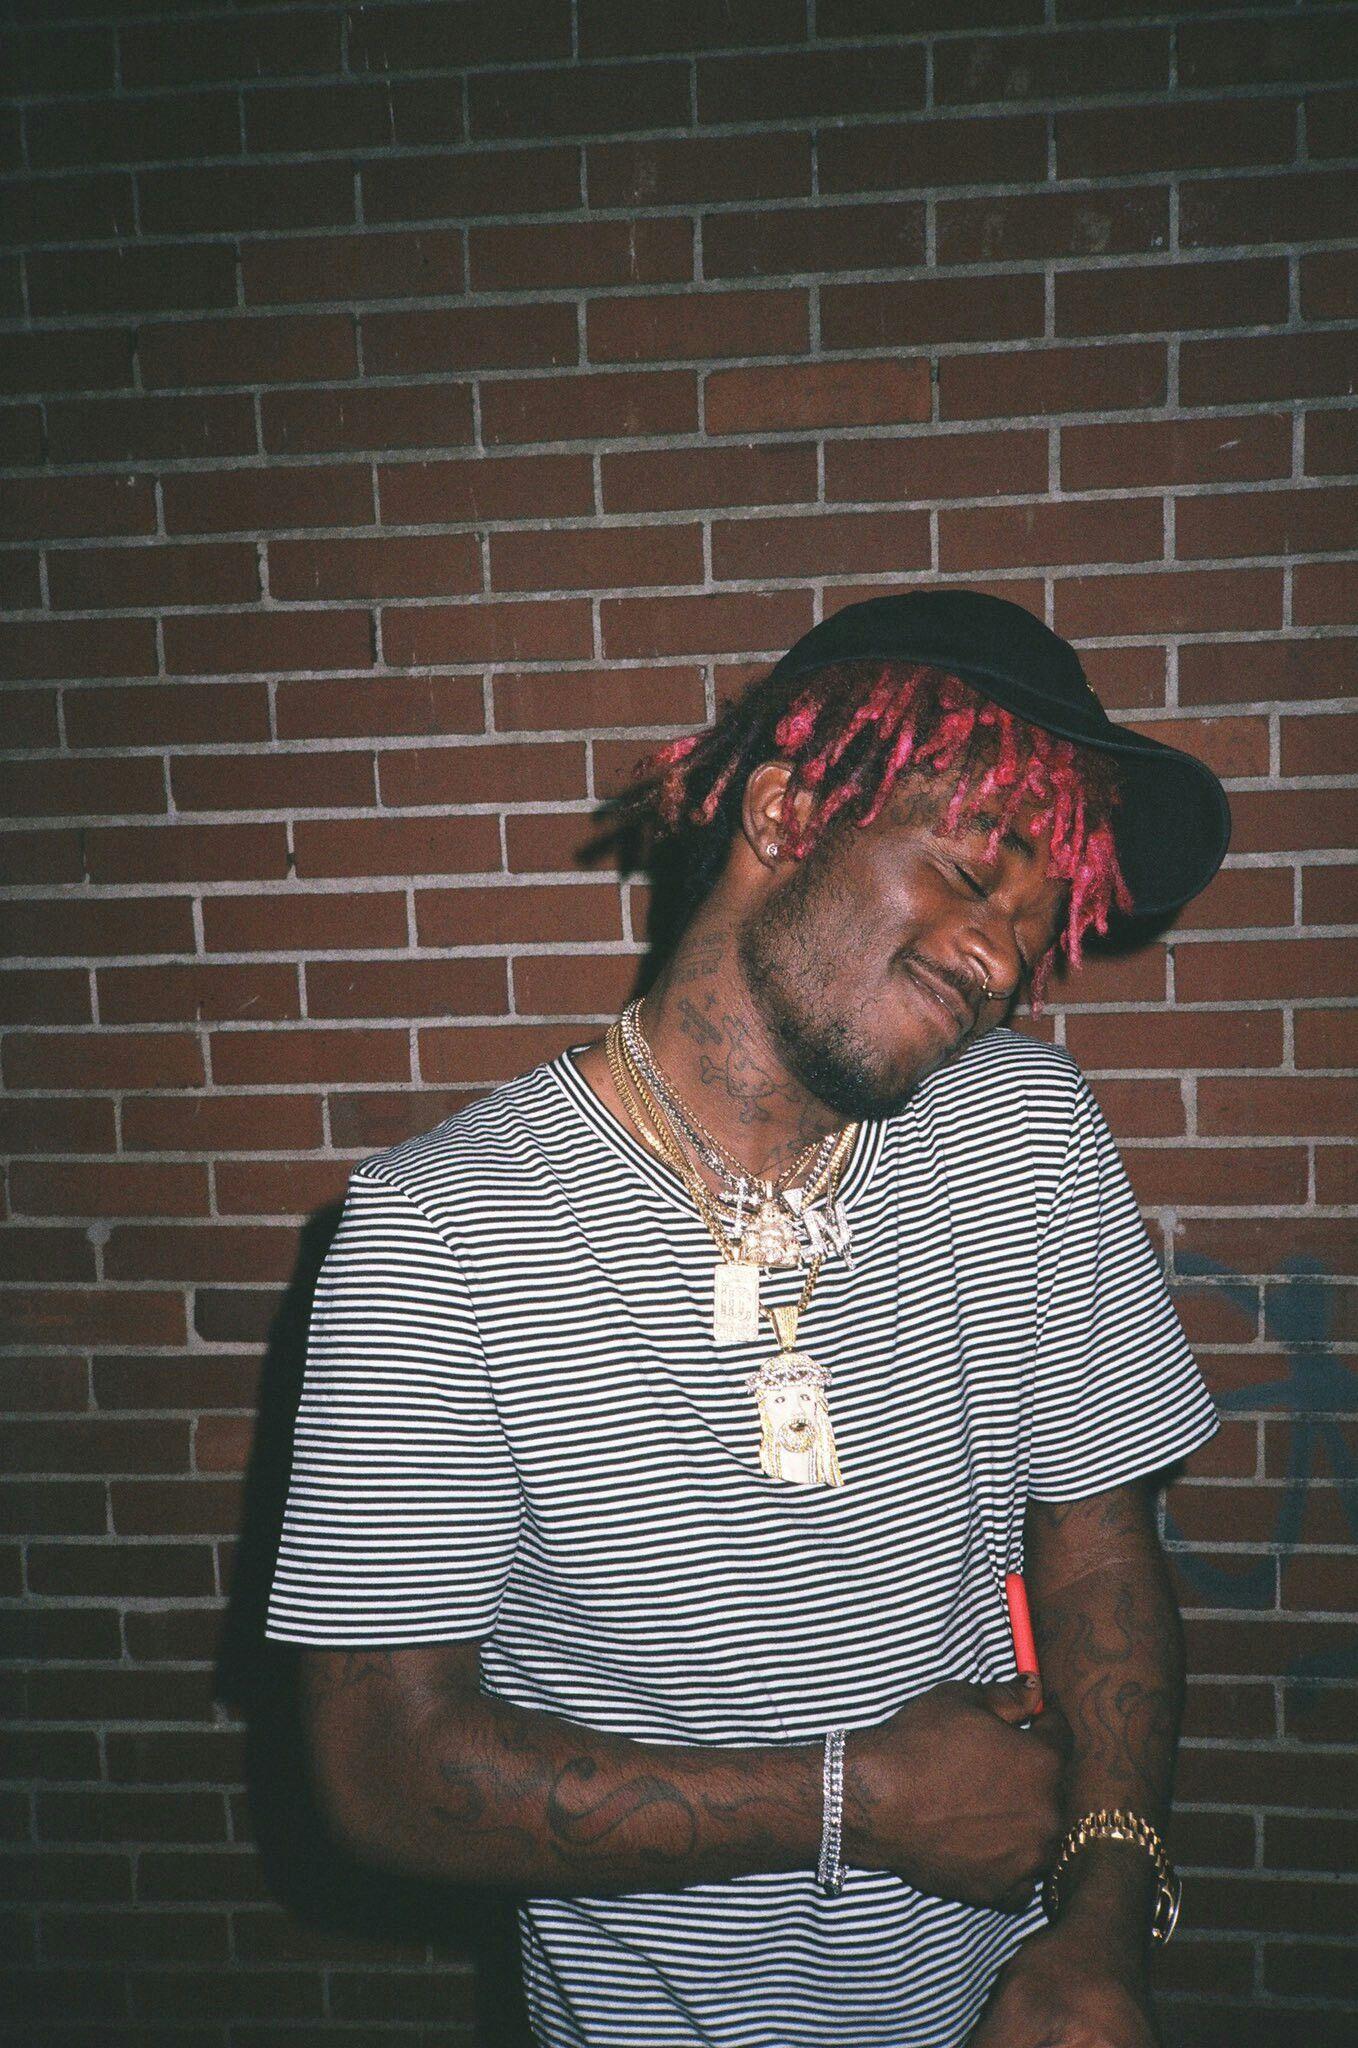 While I love lil uzi vert and his hair I chose this photo because